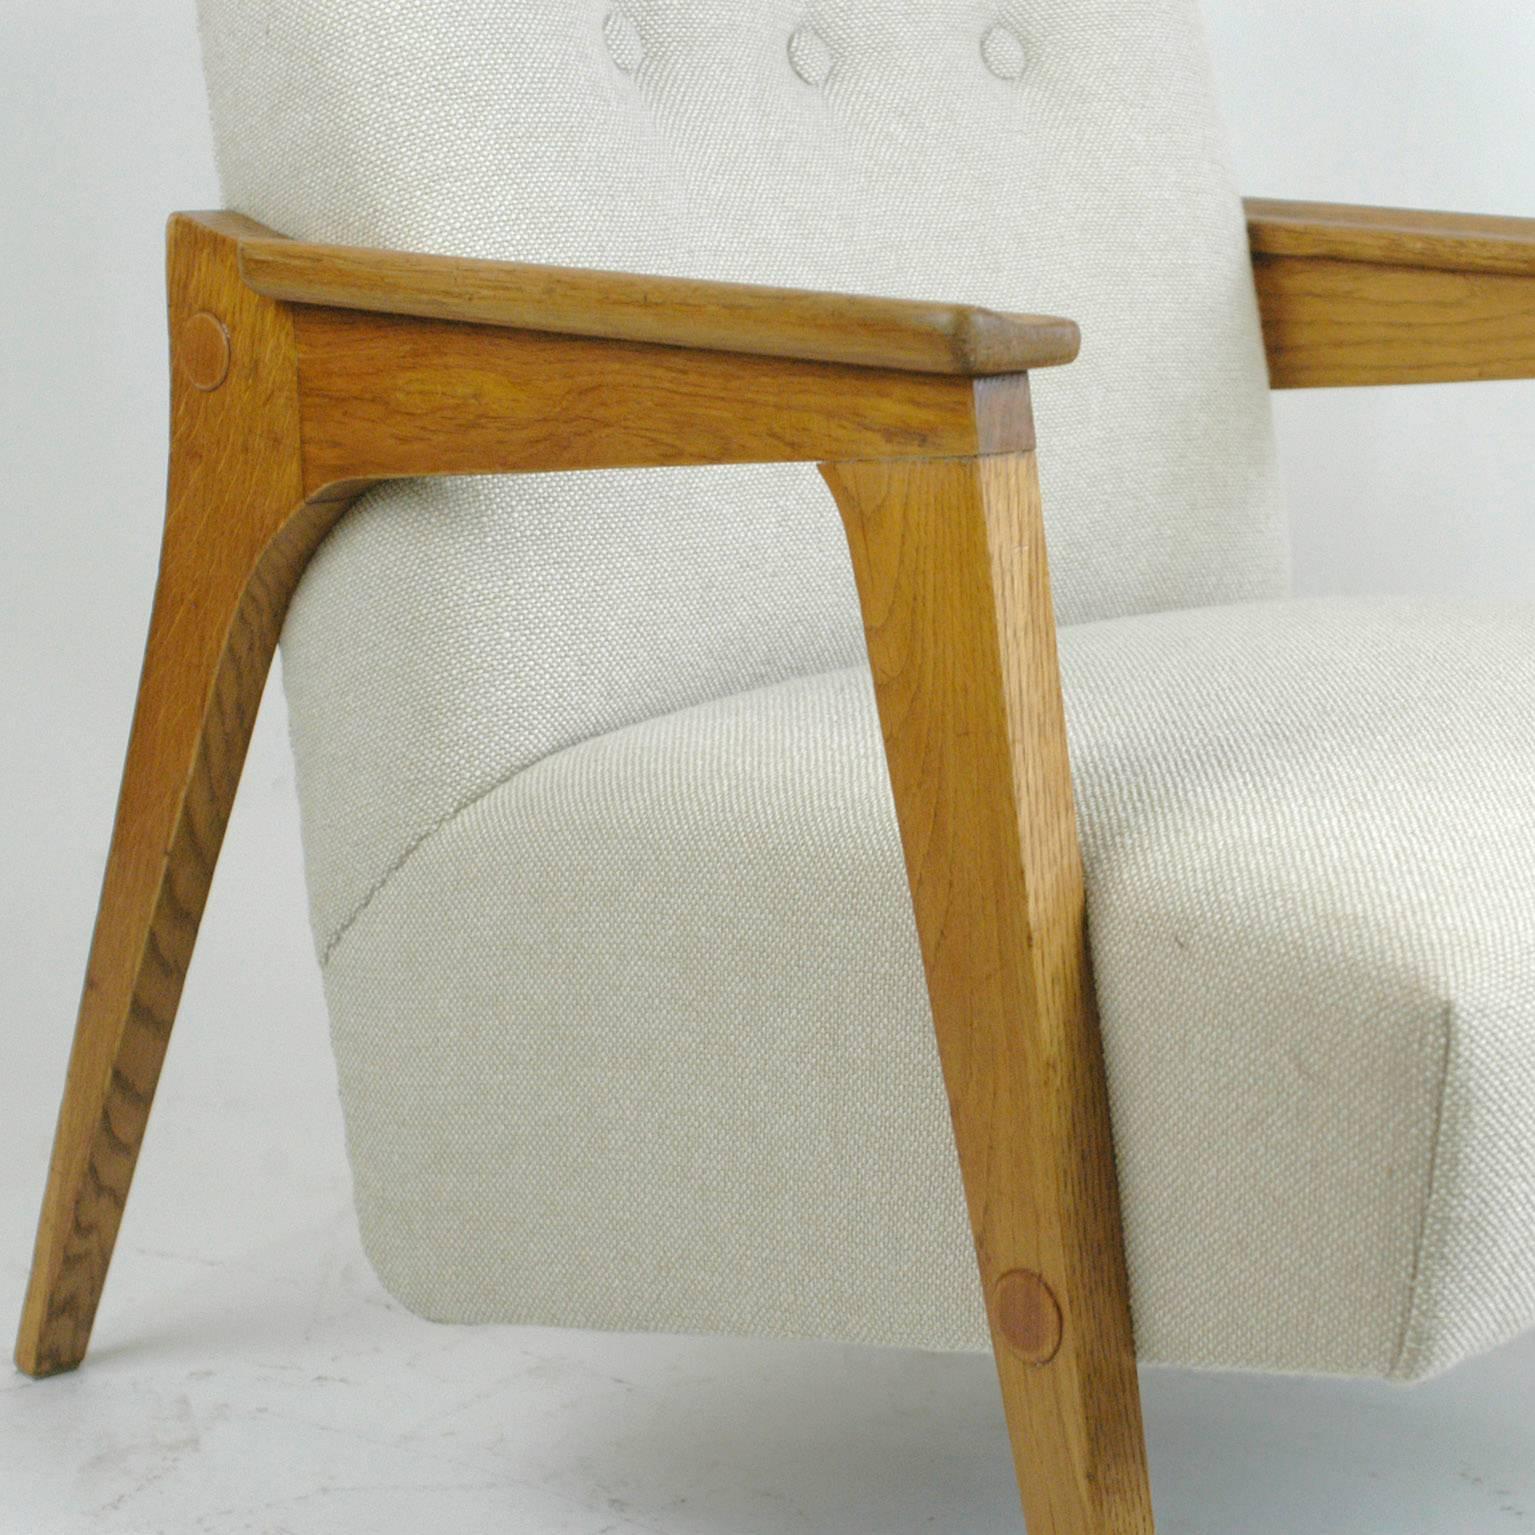 Amazing and comfortable oak armchair designed by the Austrian Post War architect Oskar Riedel. Wooden frame and new upholstery with top quality fabric by Kvadrat Denmark.
Together with the well known Architects Roland Rainer and Oswald Haerdtl